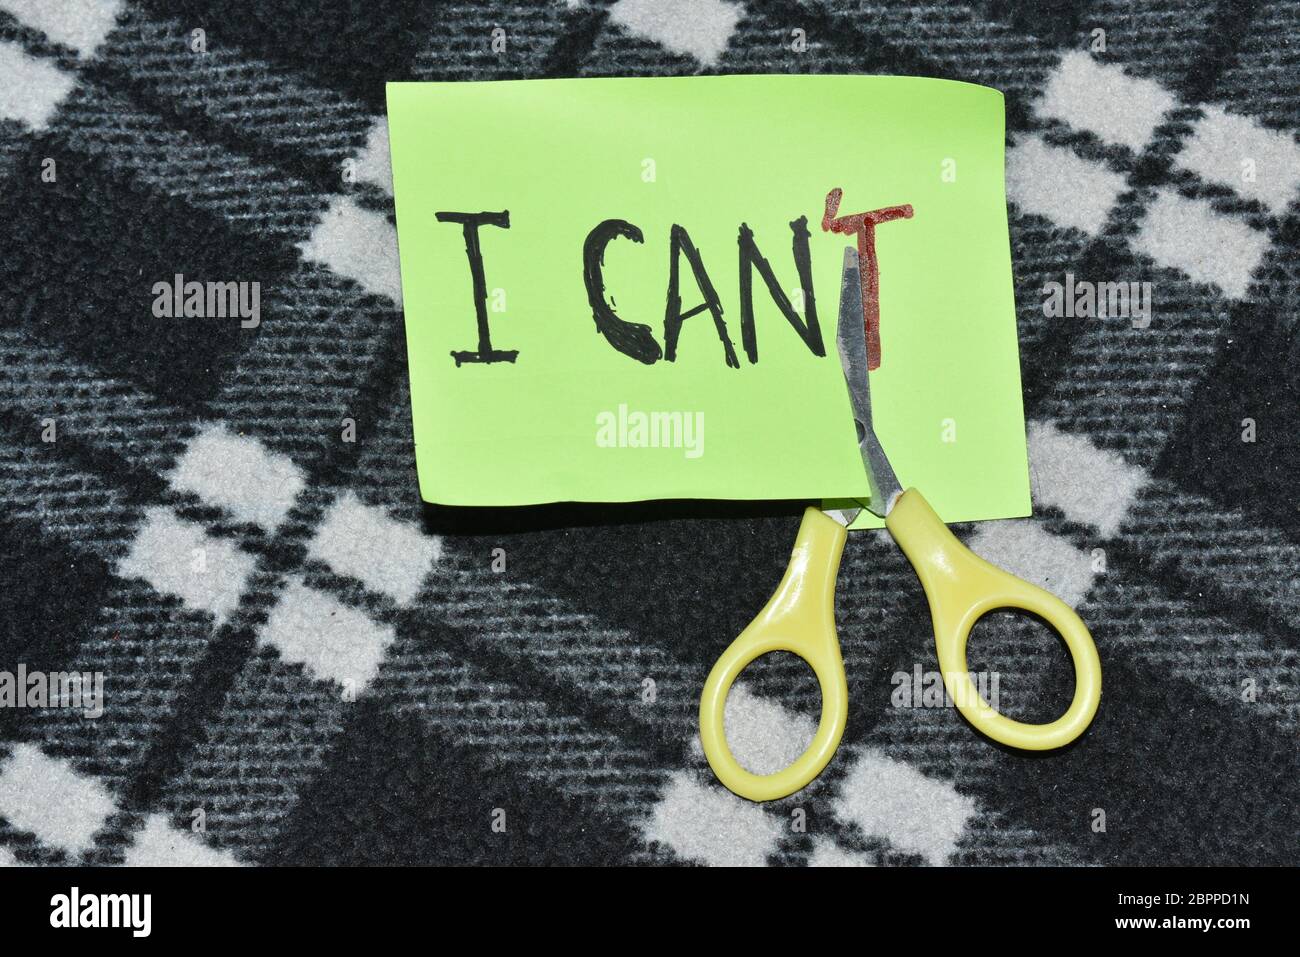 I can self motivation - cutting the letter 'T' of the written word I can't so it says I can, goal achievement, potential, overcoming Stock Photo